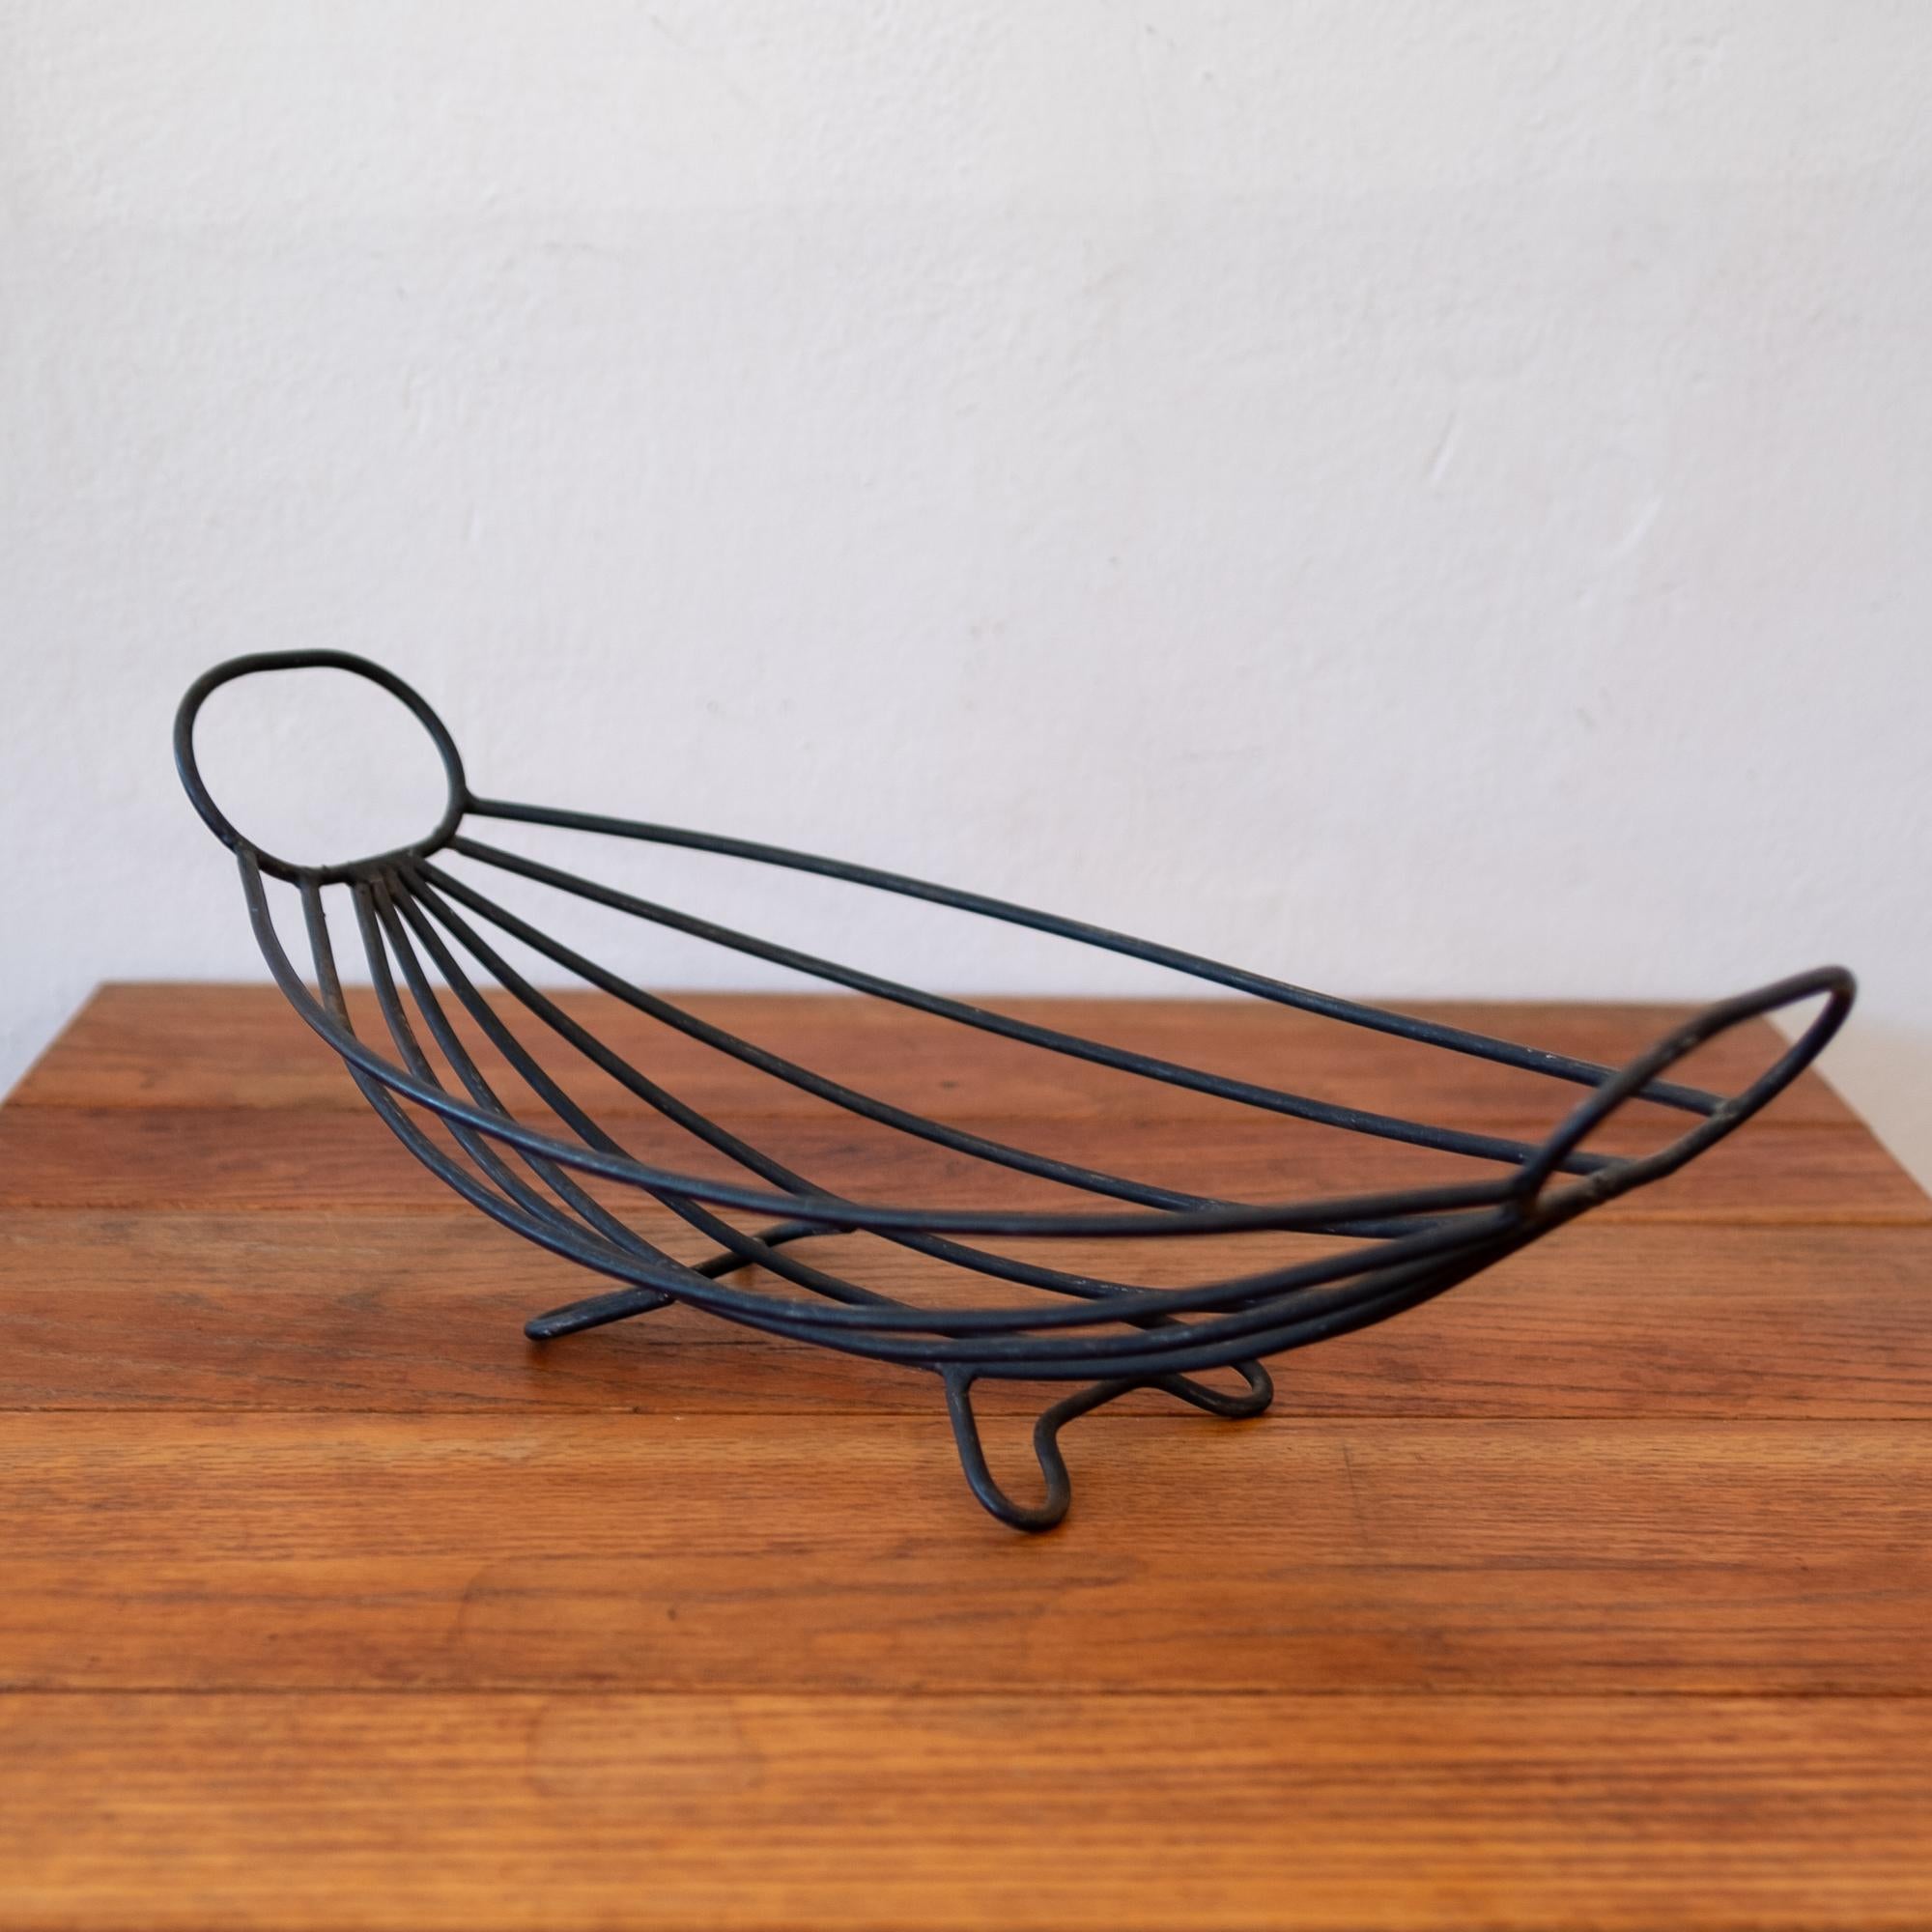 Midcentury iron catch all or fruit bowl with hairpin legs, 1950s.